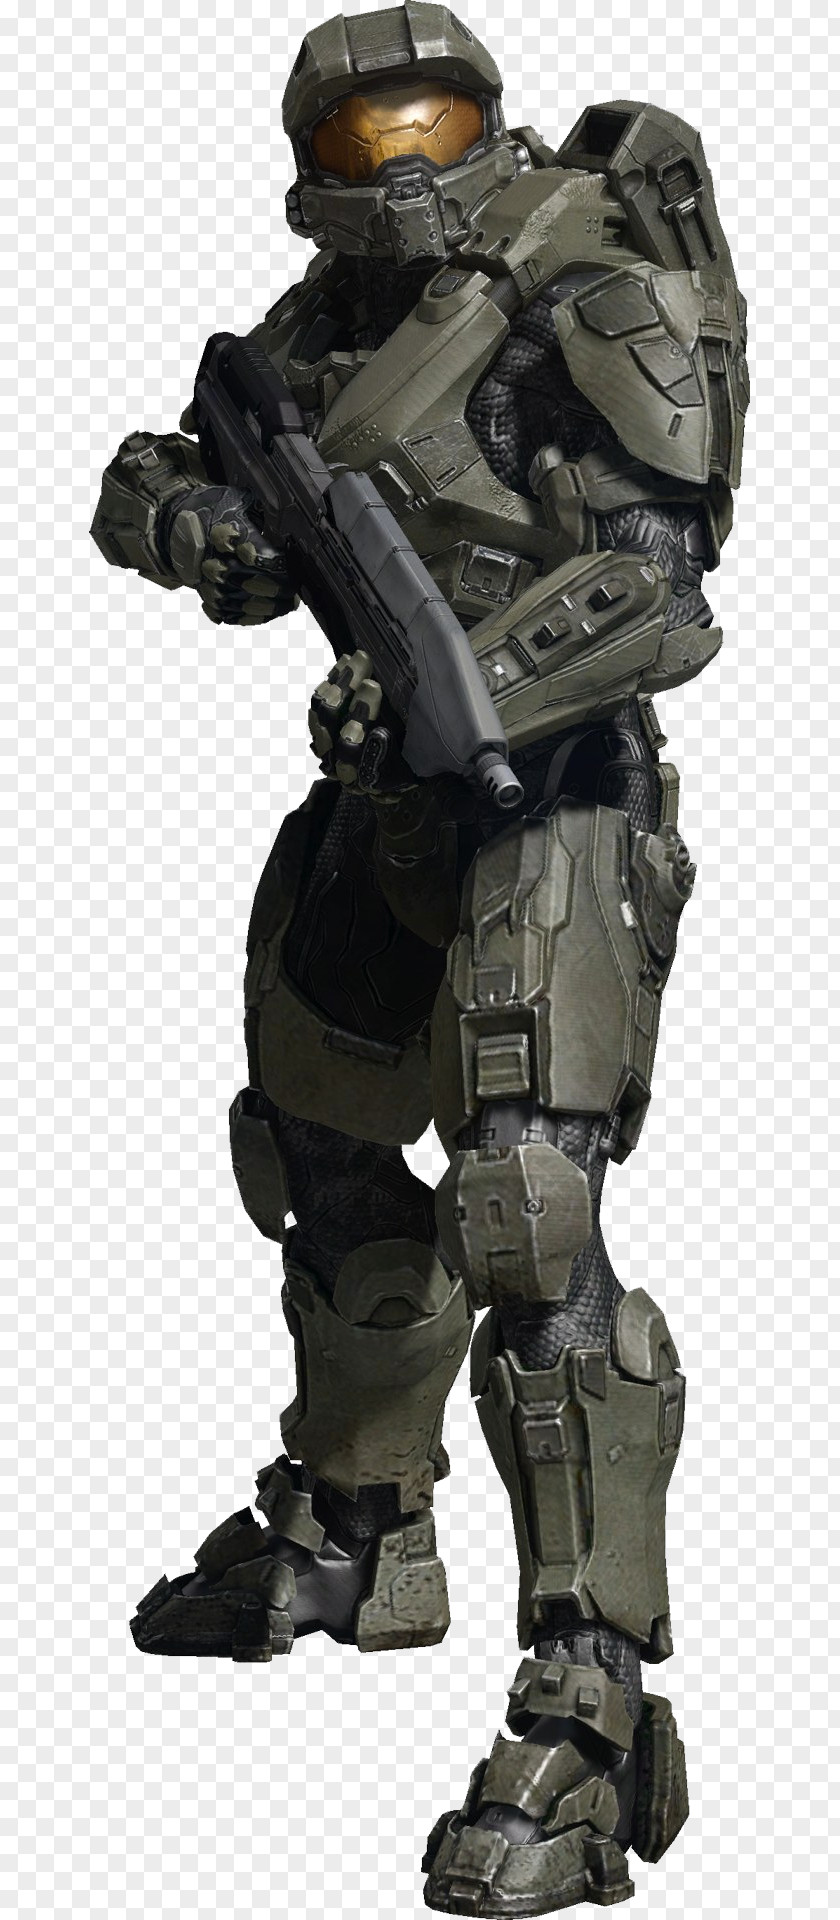 Master Chief Transparent Image Halo 4 3 5: Guardians Video Game PNG